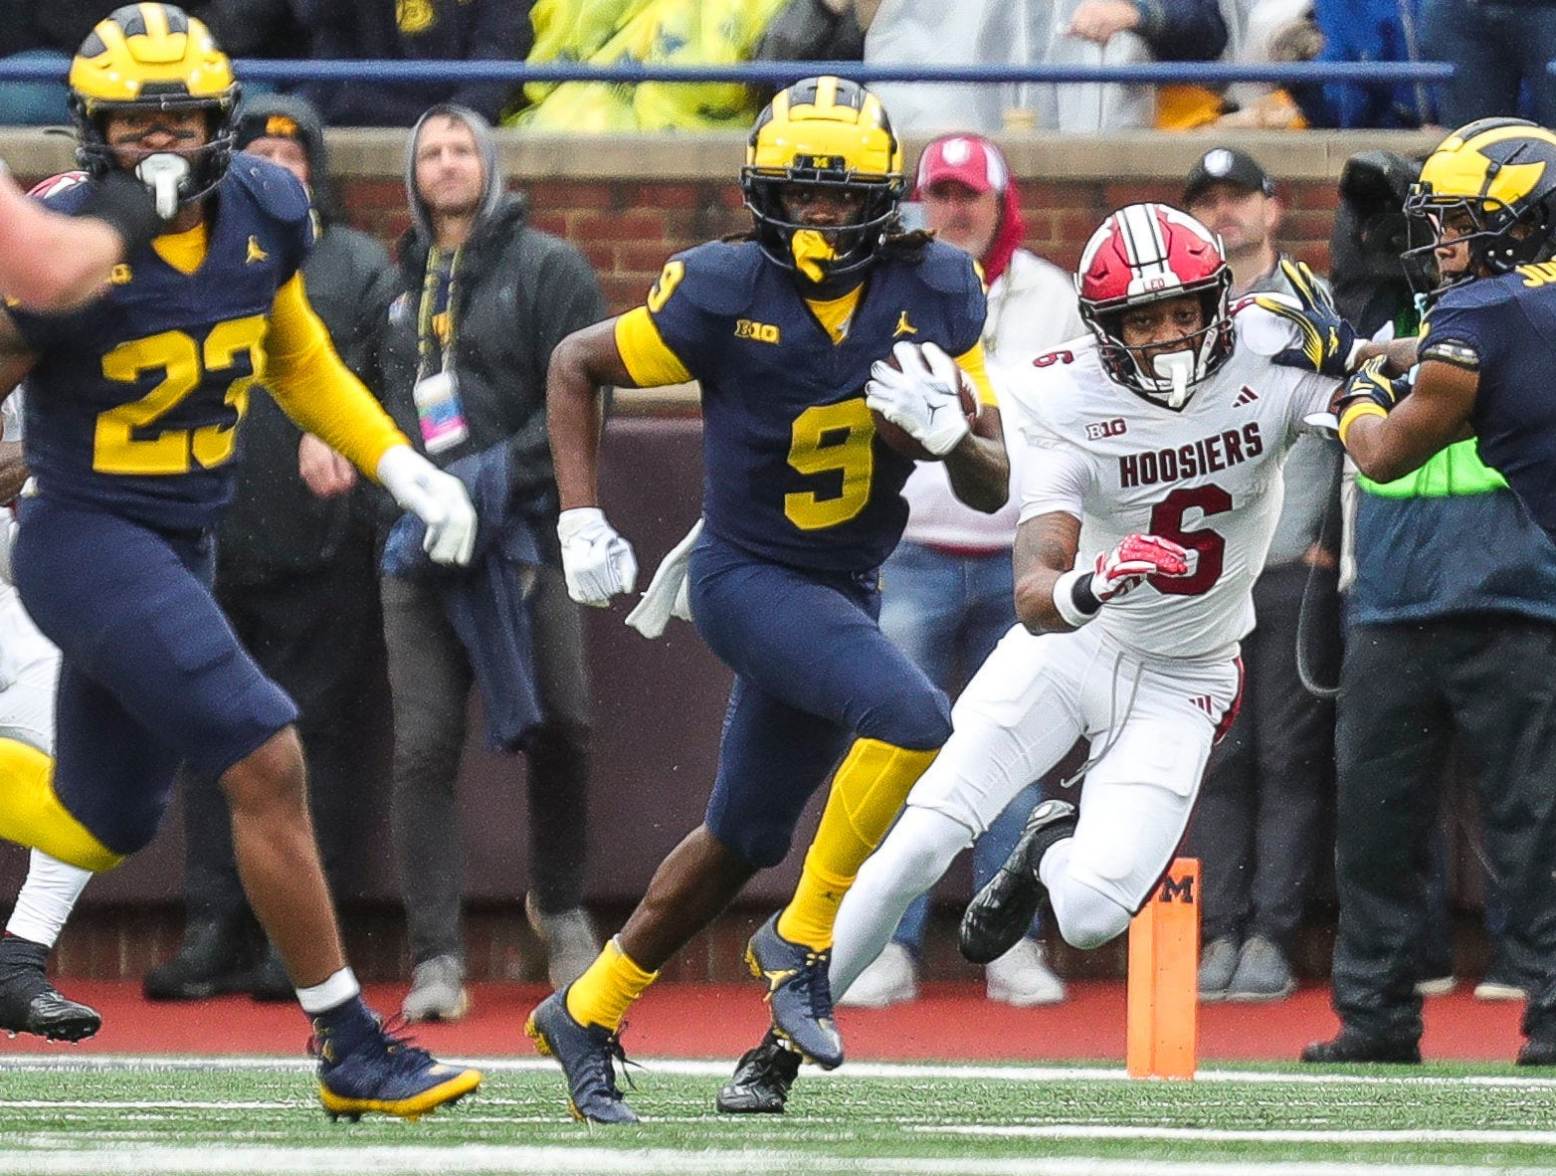 Michigan defensive back Rod Moore runs after intercepting a pass vs. Indiana during the first half at Michigan Stadium in Ann Arbor on Saturday, Oct. 14, 2023. (Junfu Han/USA Today Network)